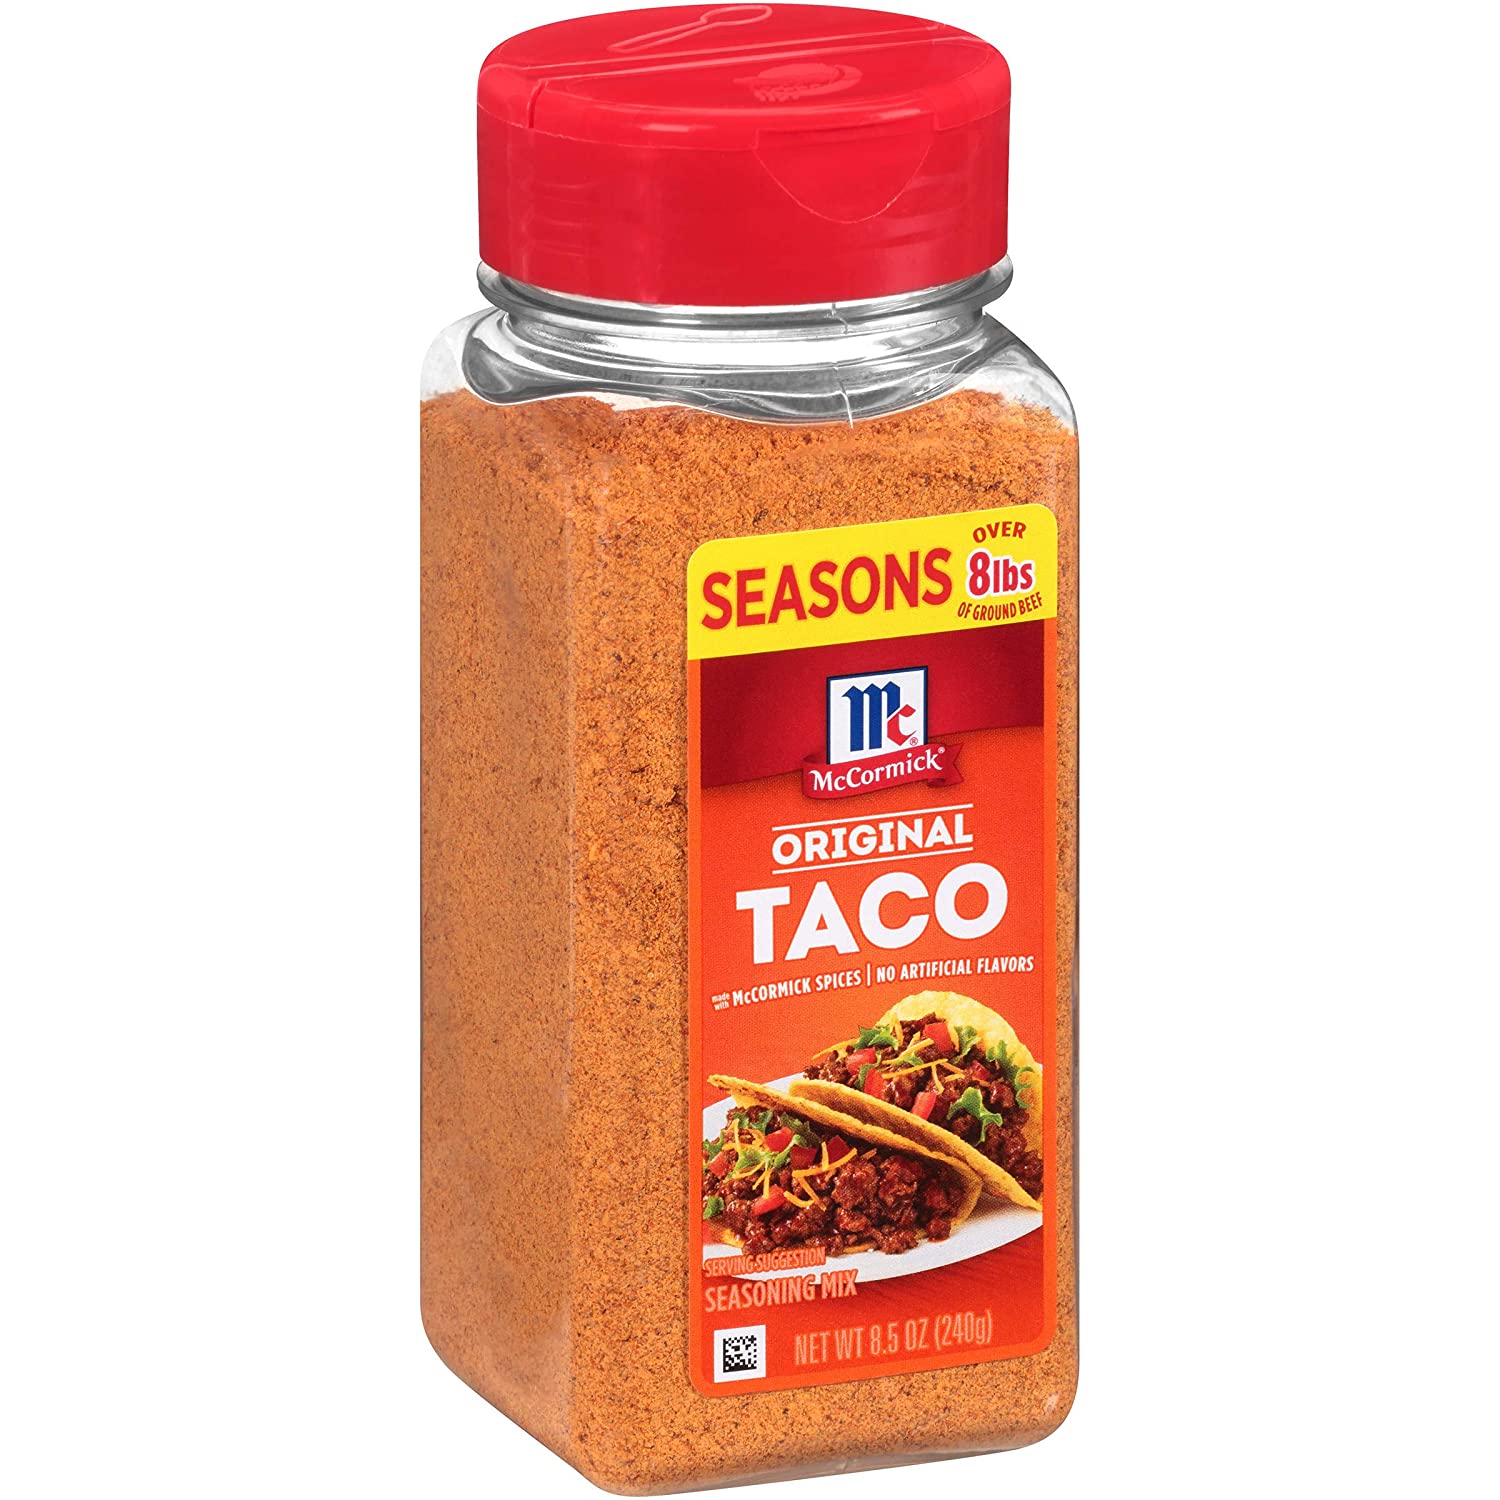 8.5-Oz McCormick Original Taco Seasoning Mix $5.12 w/ S&S + Free Shipping w/ Prime or on orders over $25